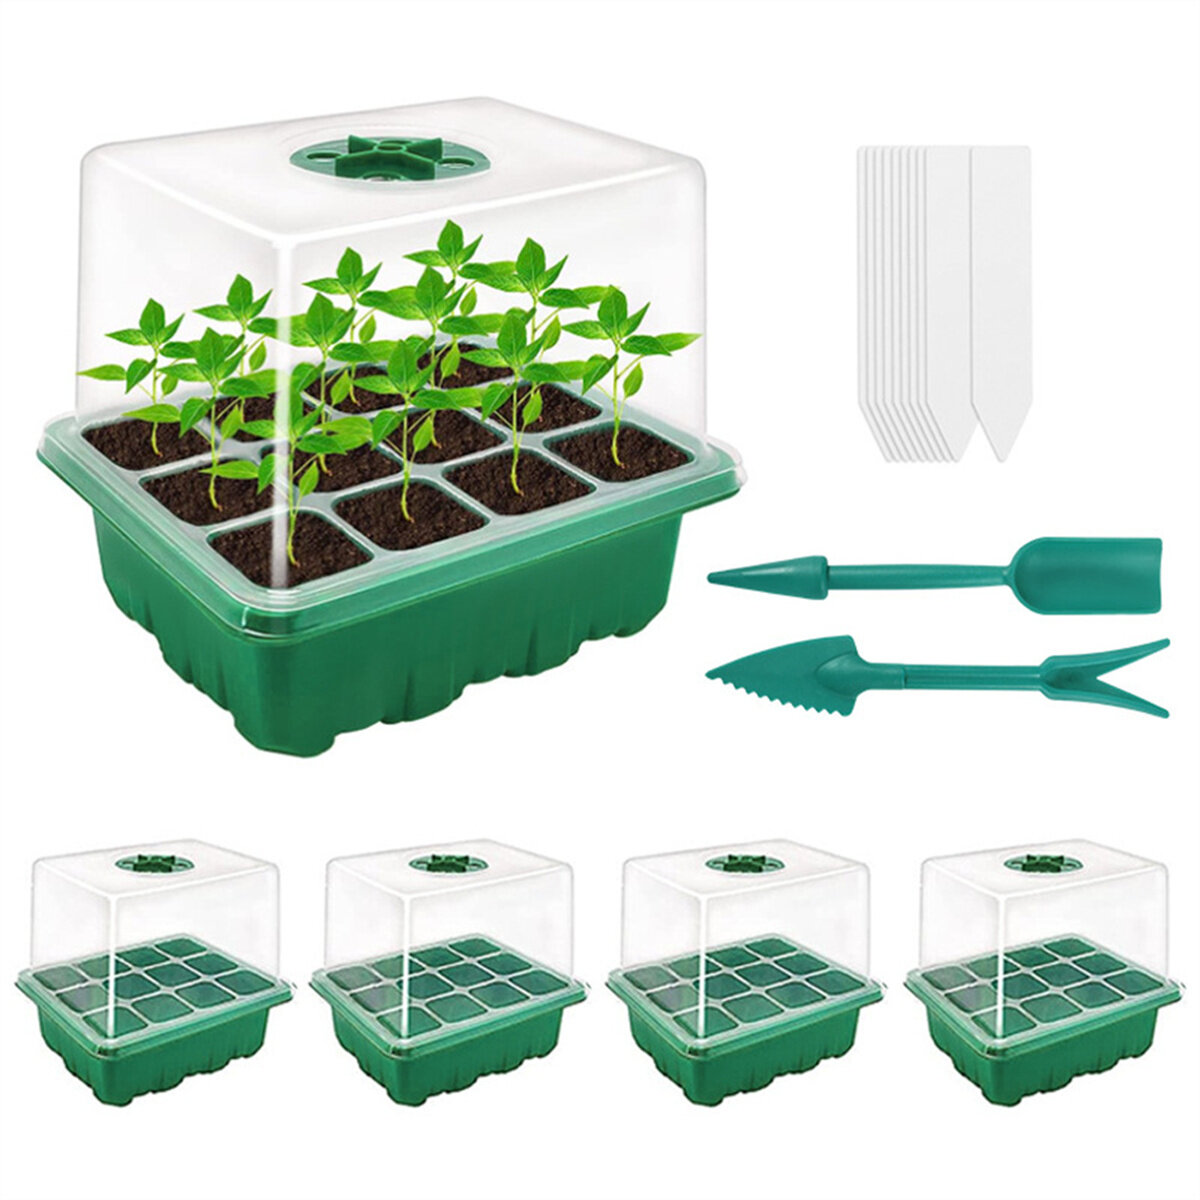 

5 Pack 12 Cells PVC Seed Starter Tray Kit Indoor Gardening Adjustable Humidity Control Seedling Germination Planter Heig